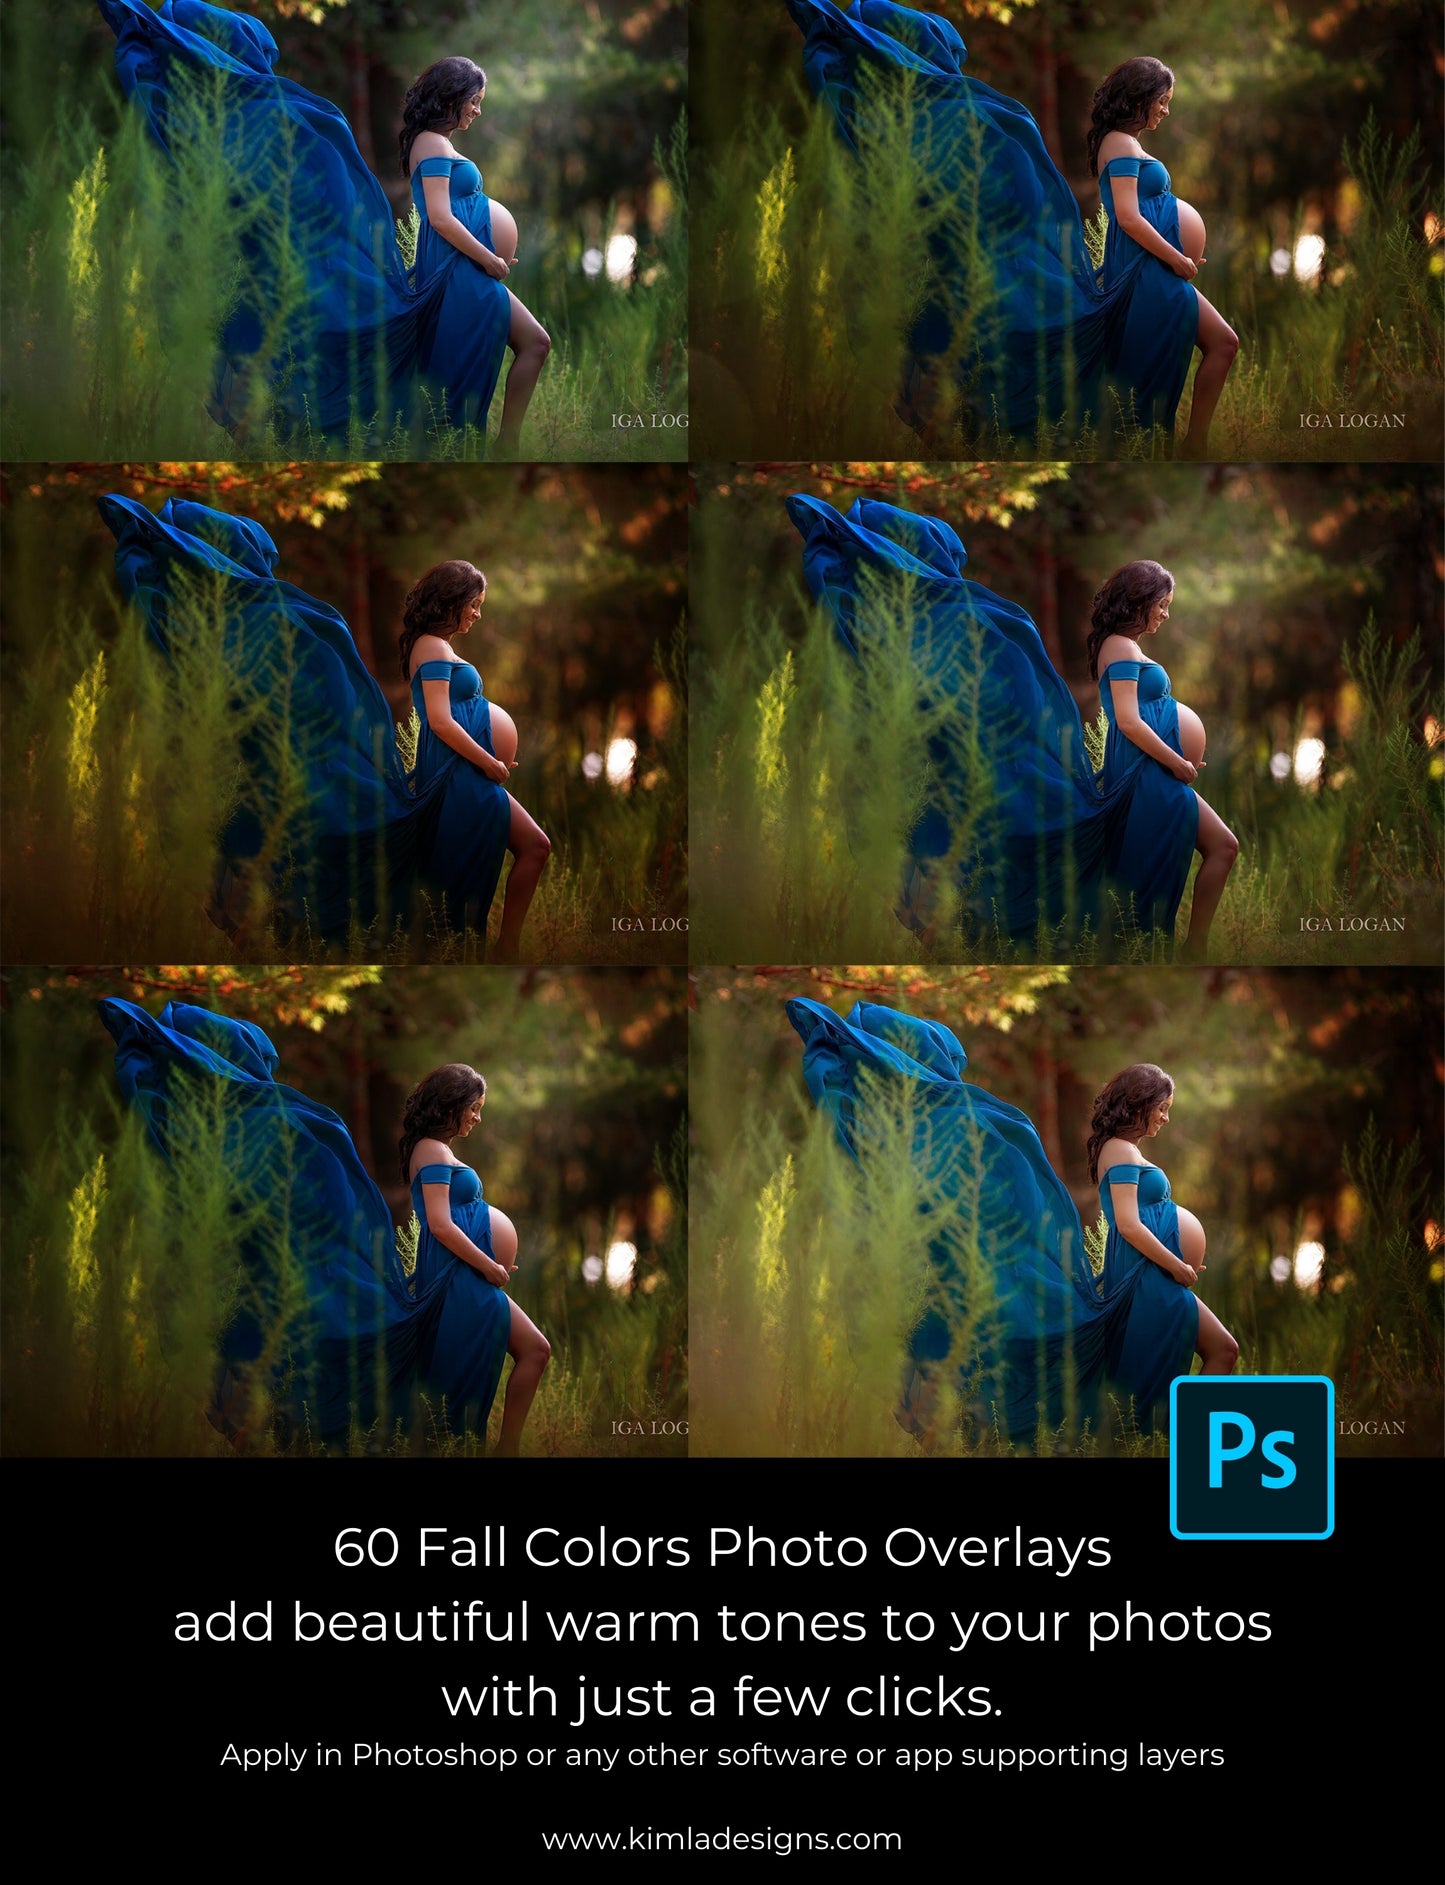 60 Fall Colors Photo Overlays